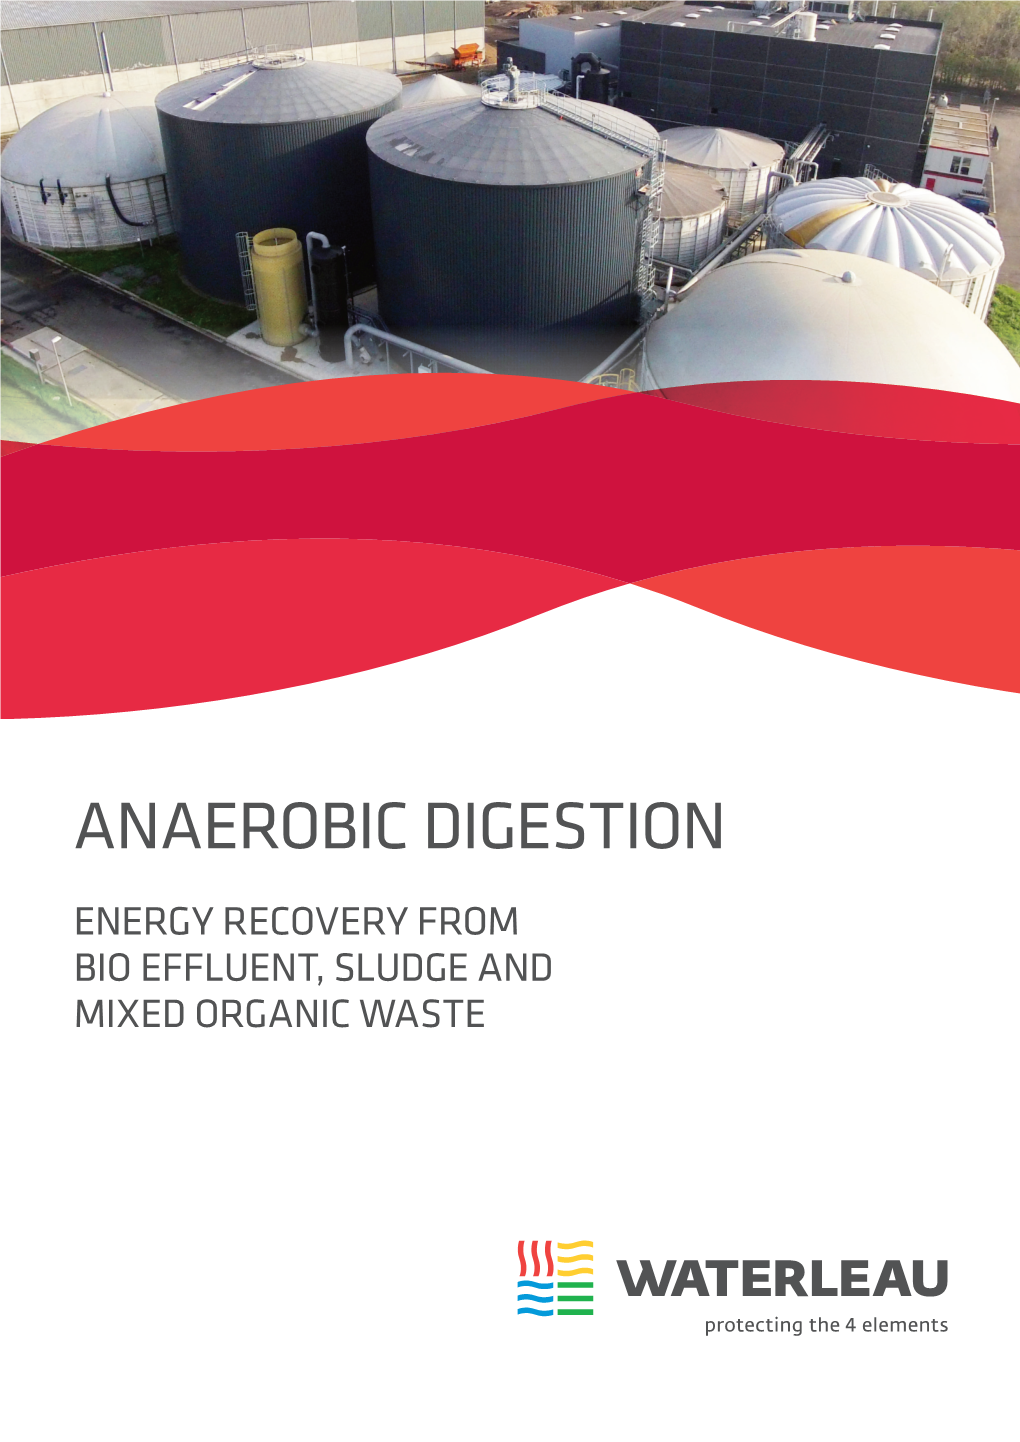 Anaerobic Digestion Energy Recovery from Bio Effluent, Sludge and Mixed Organic Waste Energy Recovery from Bio Effluent, Sludge and Mixed Organic Waste